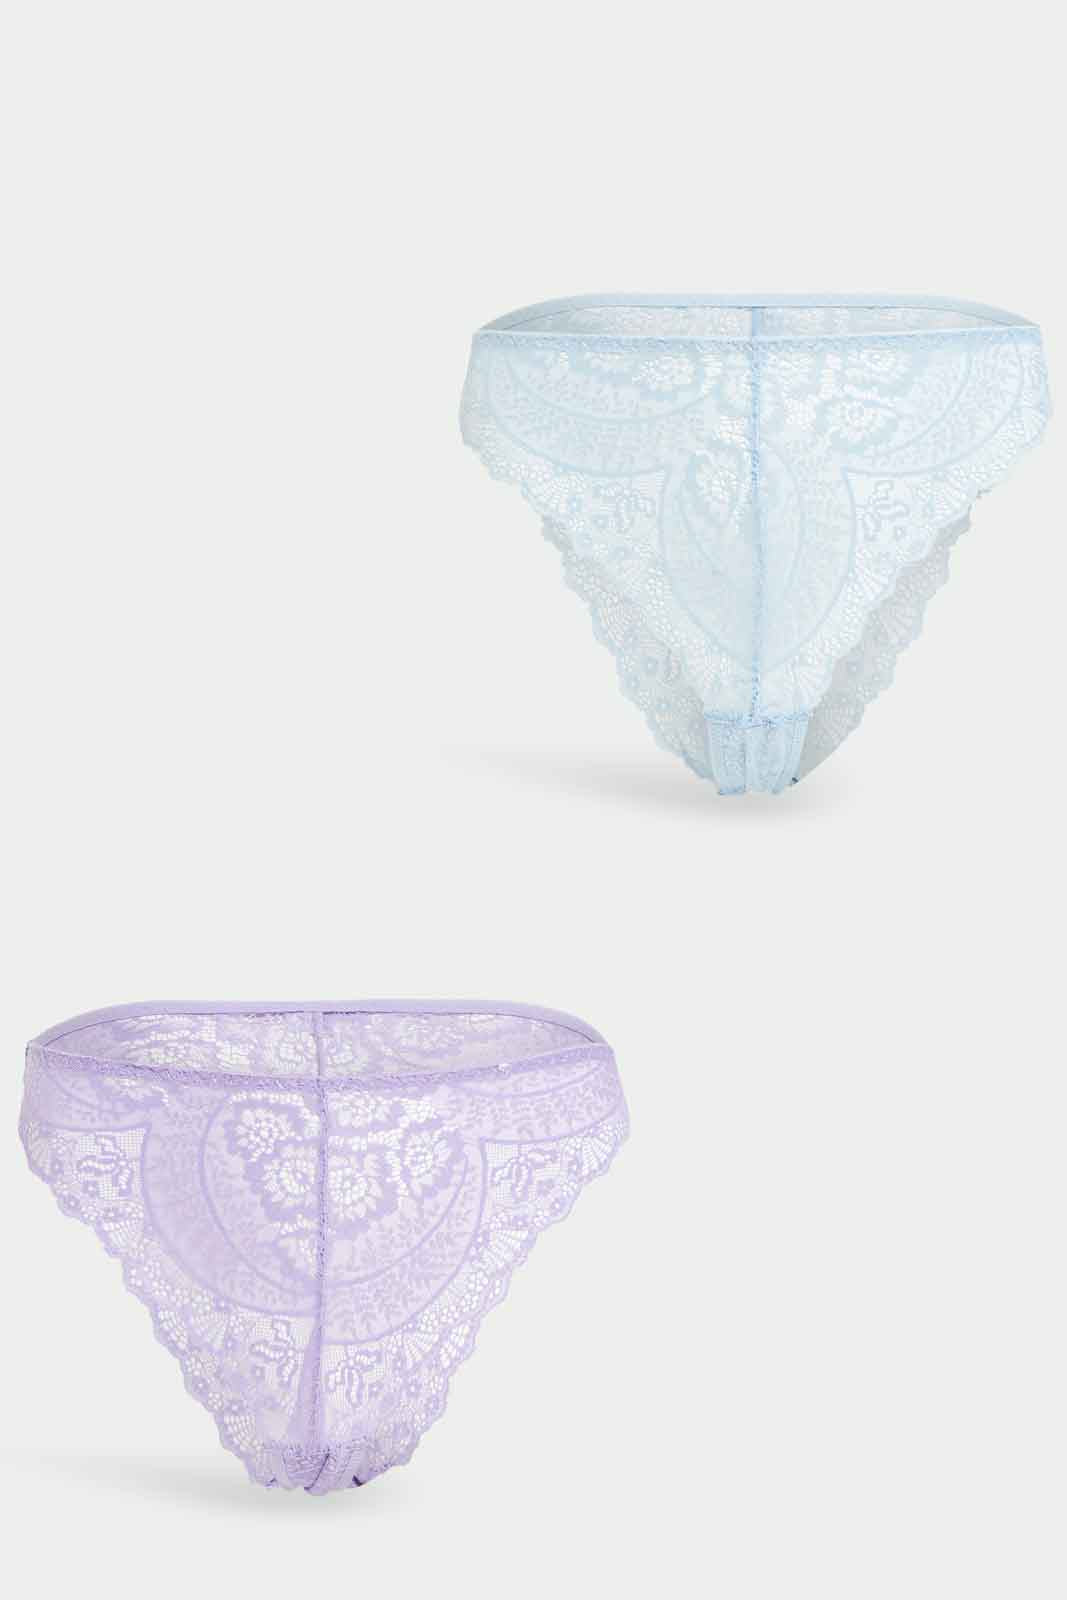 Women's 2-Pack Lace Thong Undies, Women's Clearance